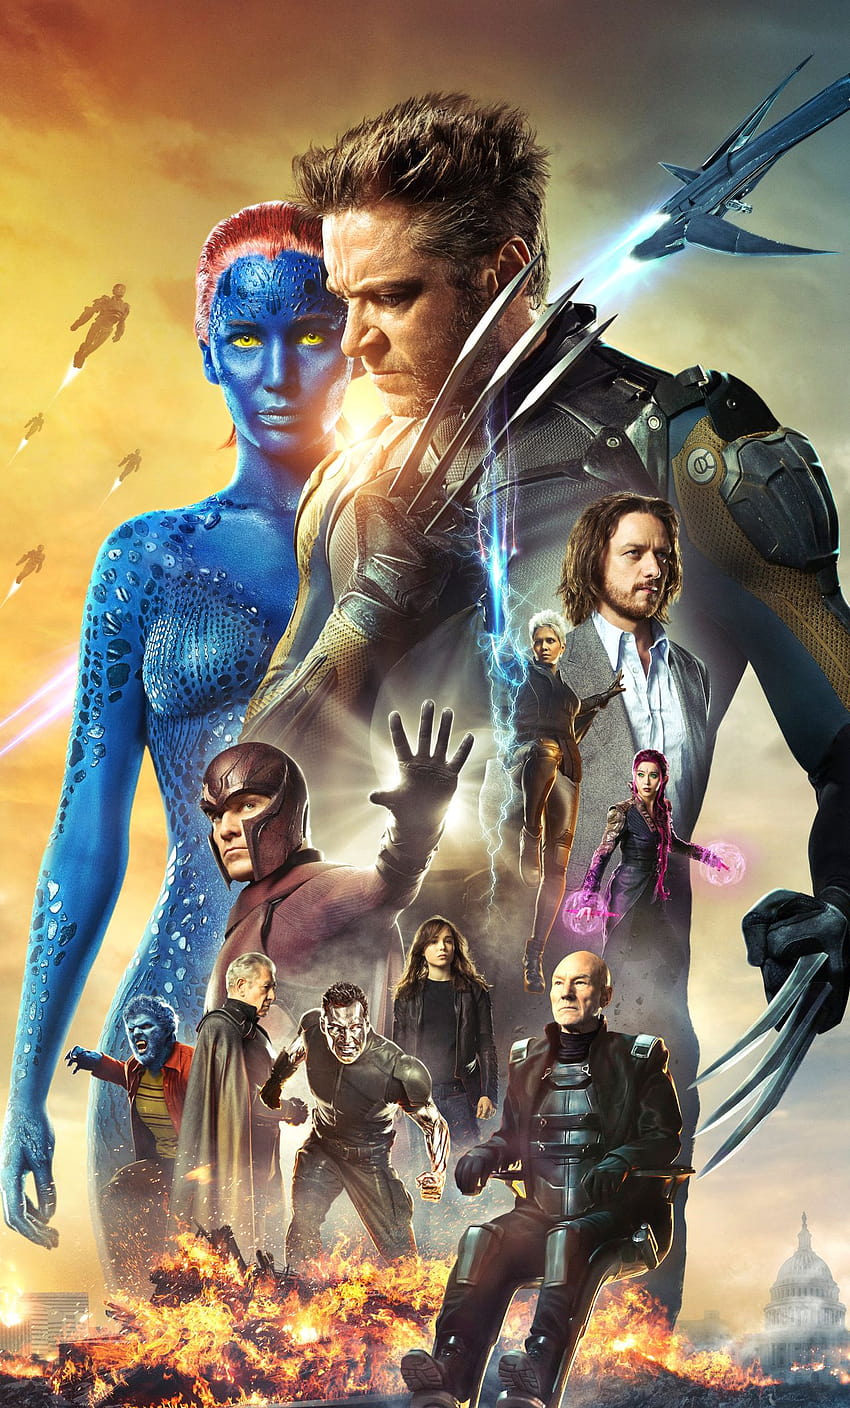 1280x2120 X Men Days Of Future Past Movie Poster iPhone , Backgrounds, and, x men movie iphone HD phone wallpaper